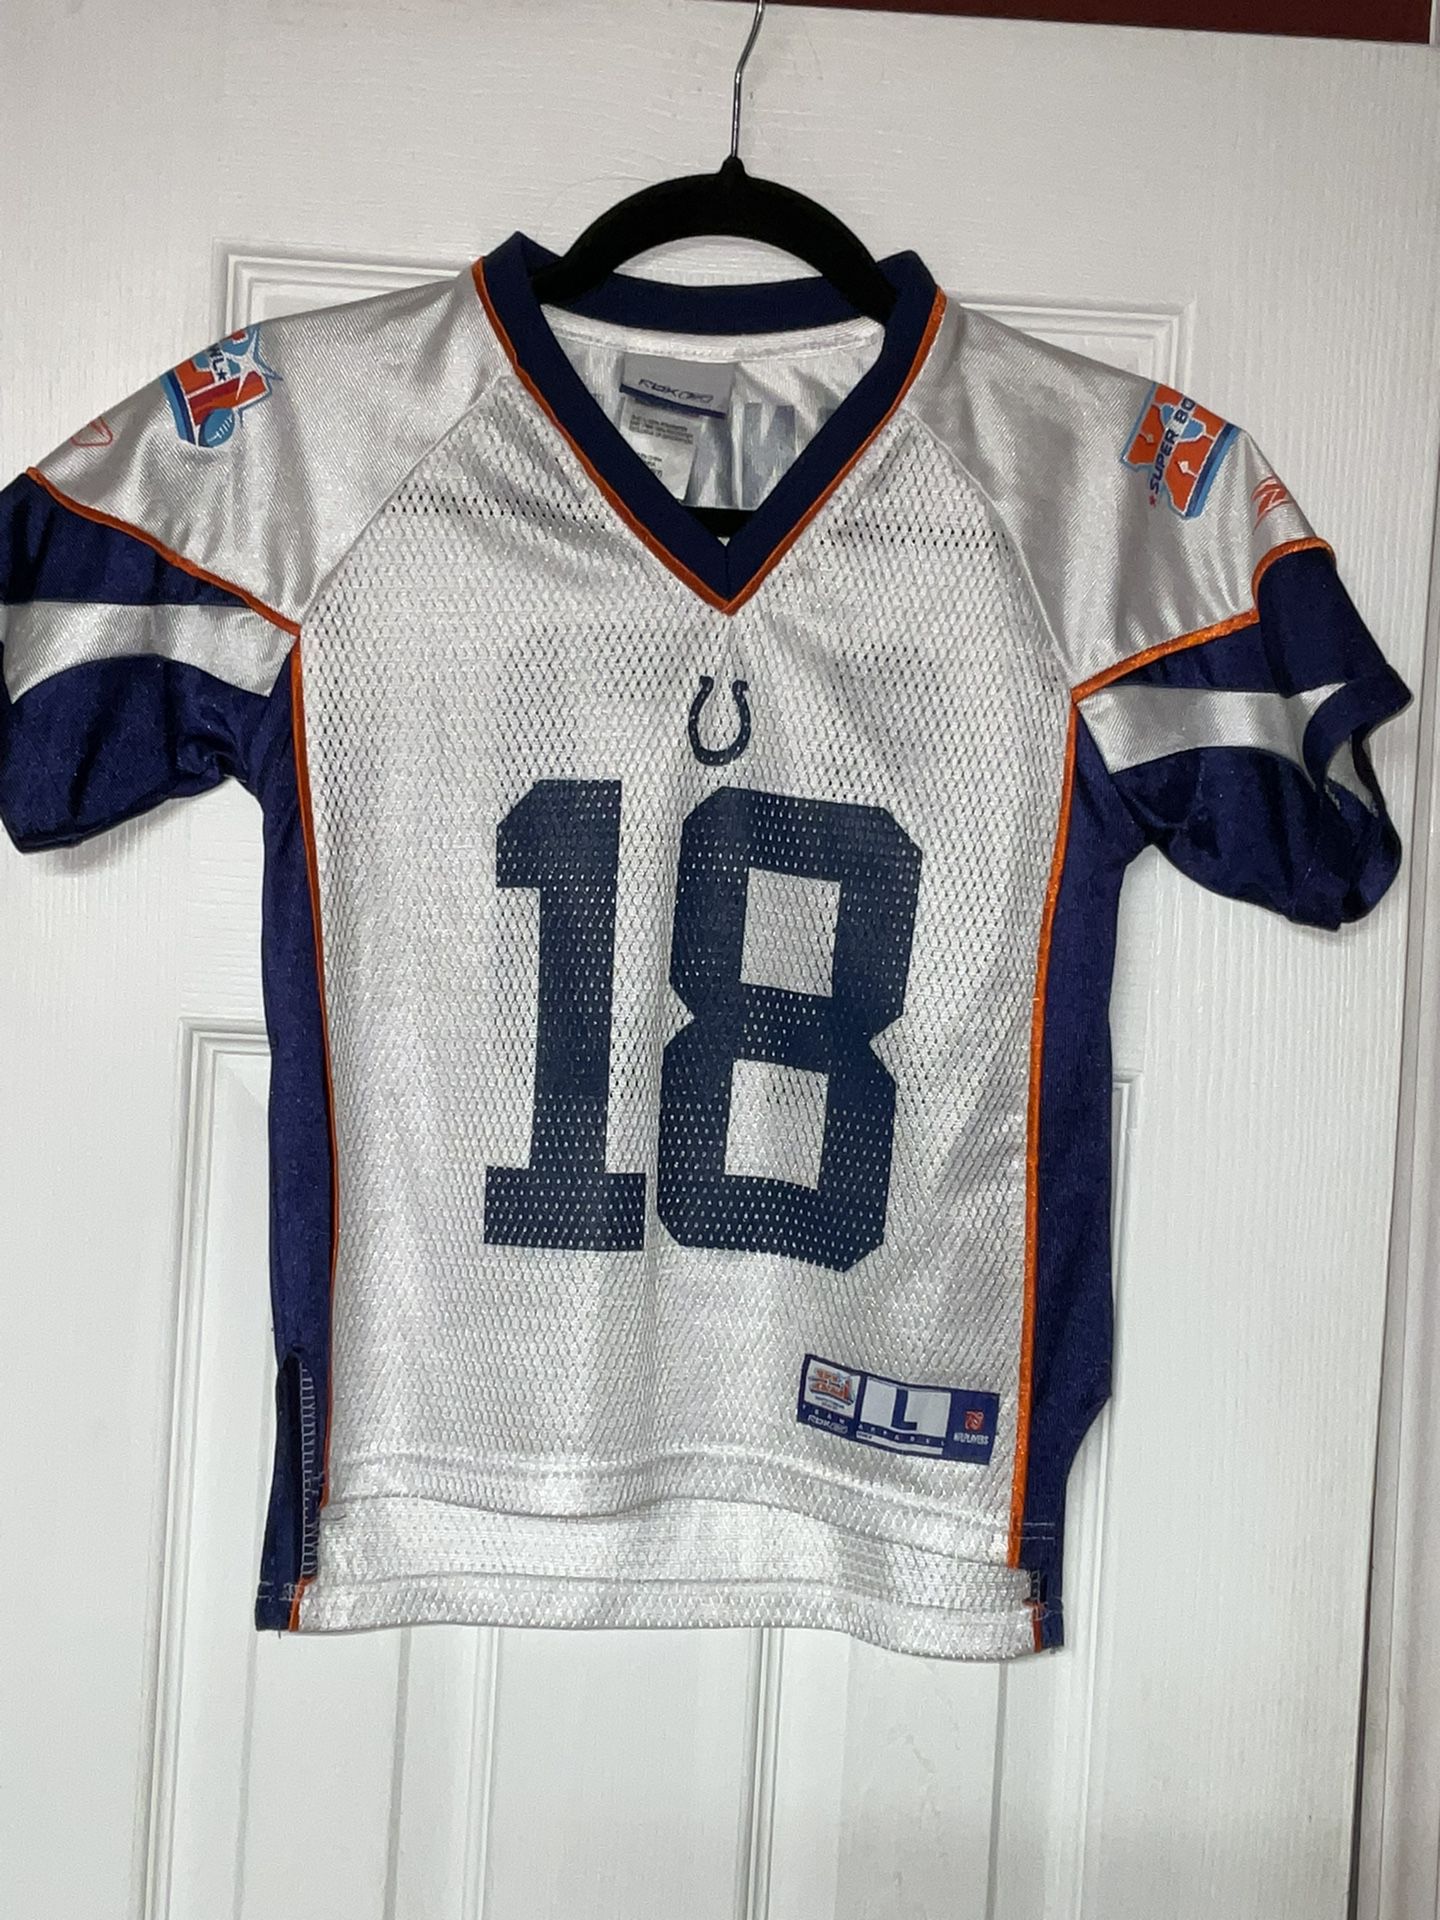 Peyton Manning Indianapolis Colts Super Bowl XLI SB41 jersey YOUTH Large (7) No rips, tears or stains